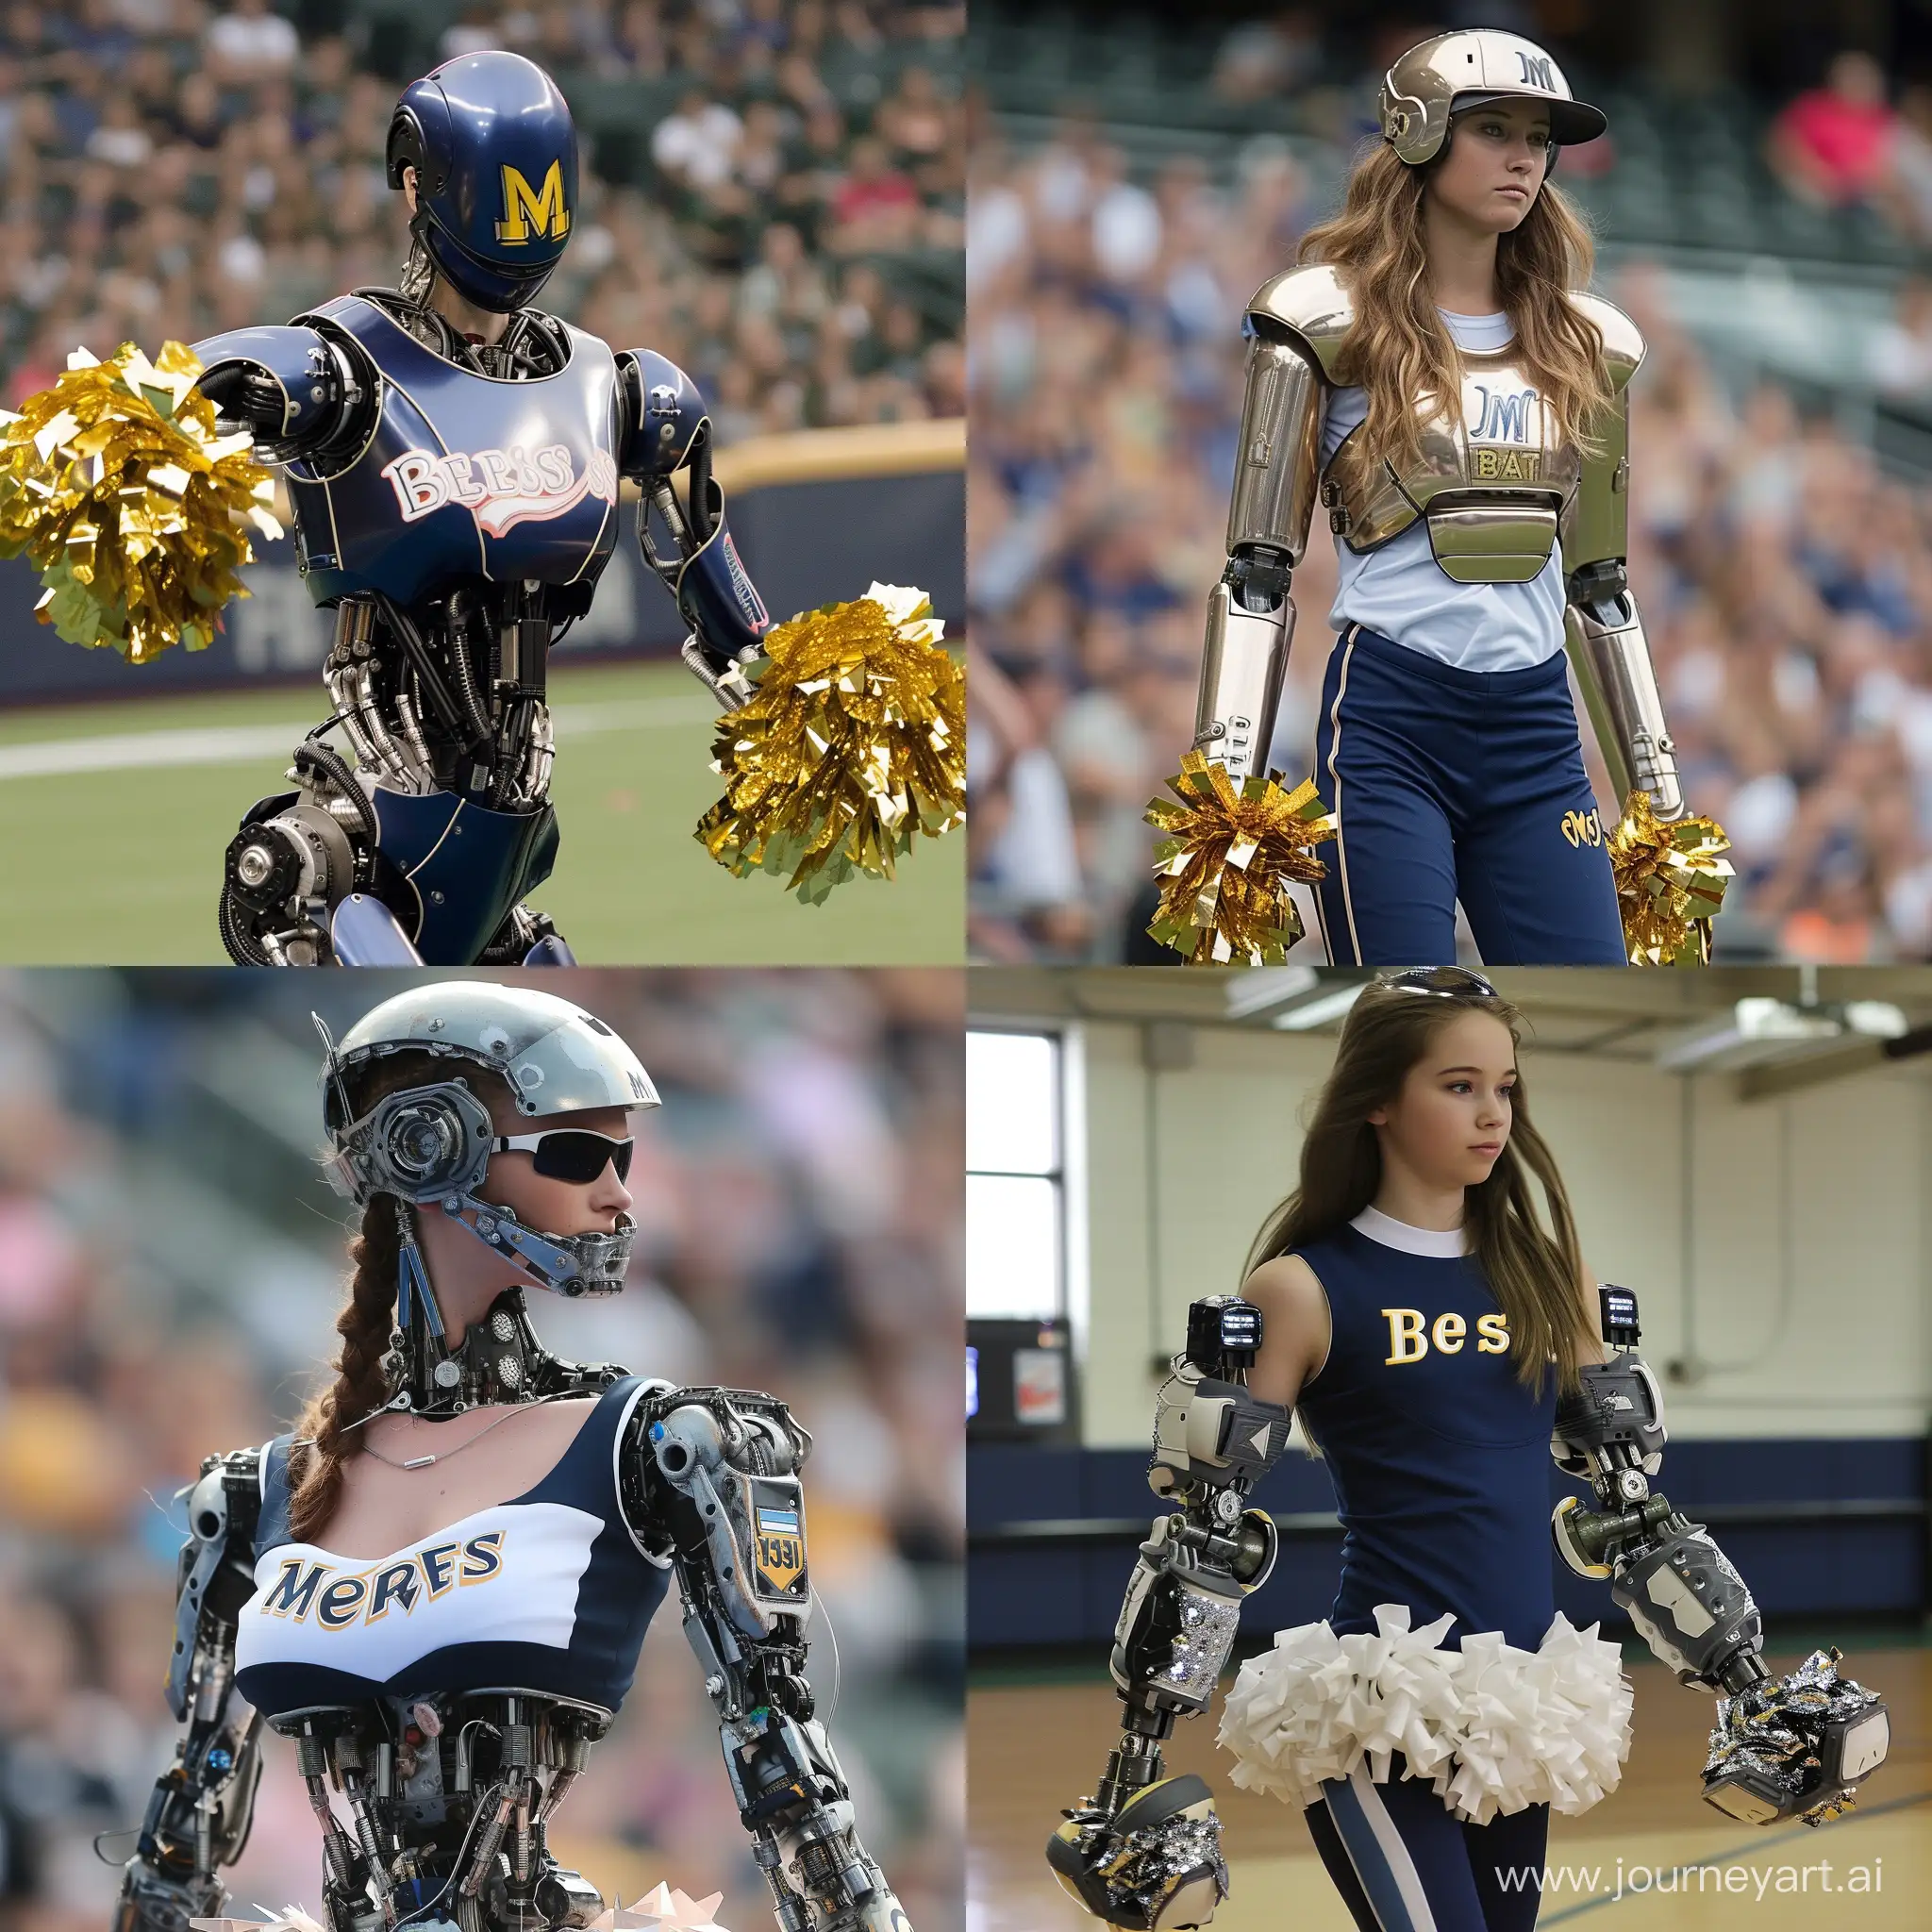 Milwaukee Brewers 13-14 year old cheerleader, turns out to be a robot, malfunctioning